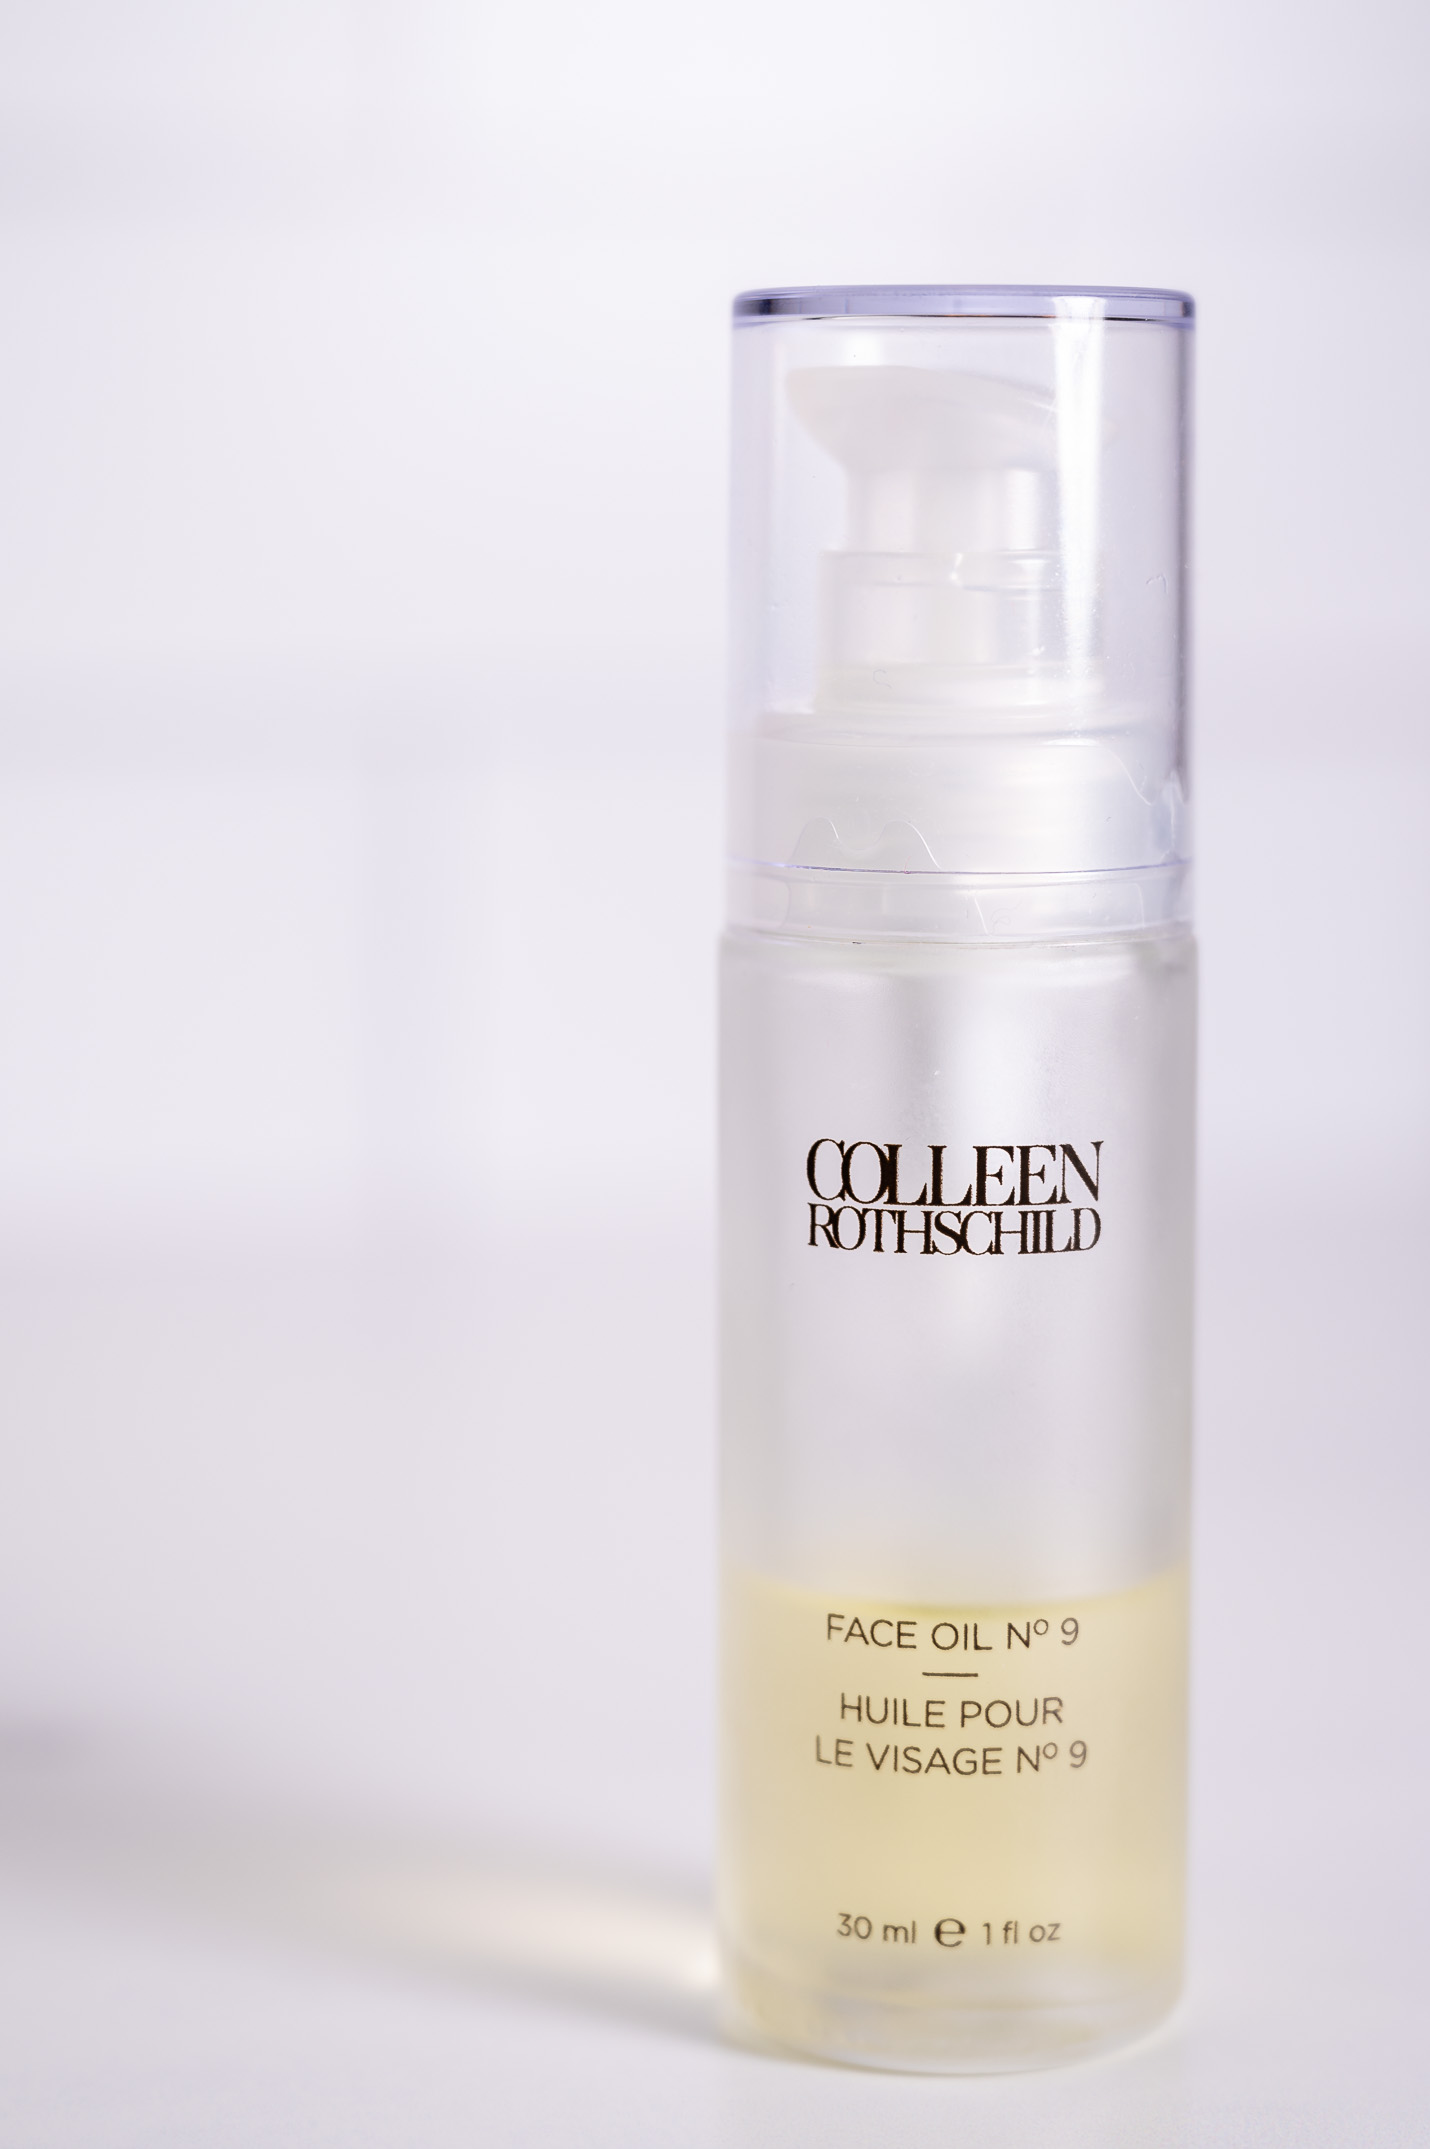 Colleen Rothschild Beauty Face Oil No. 9